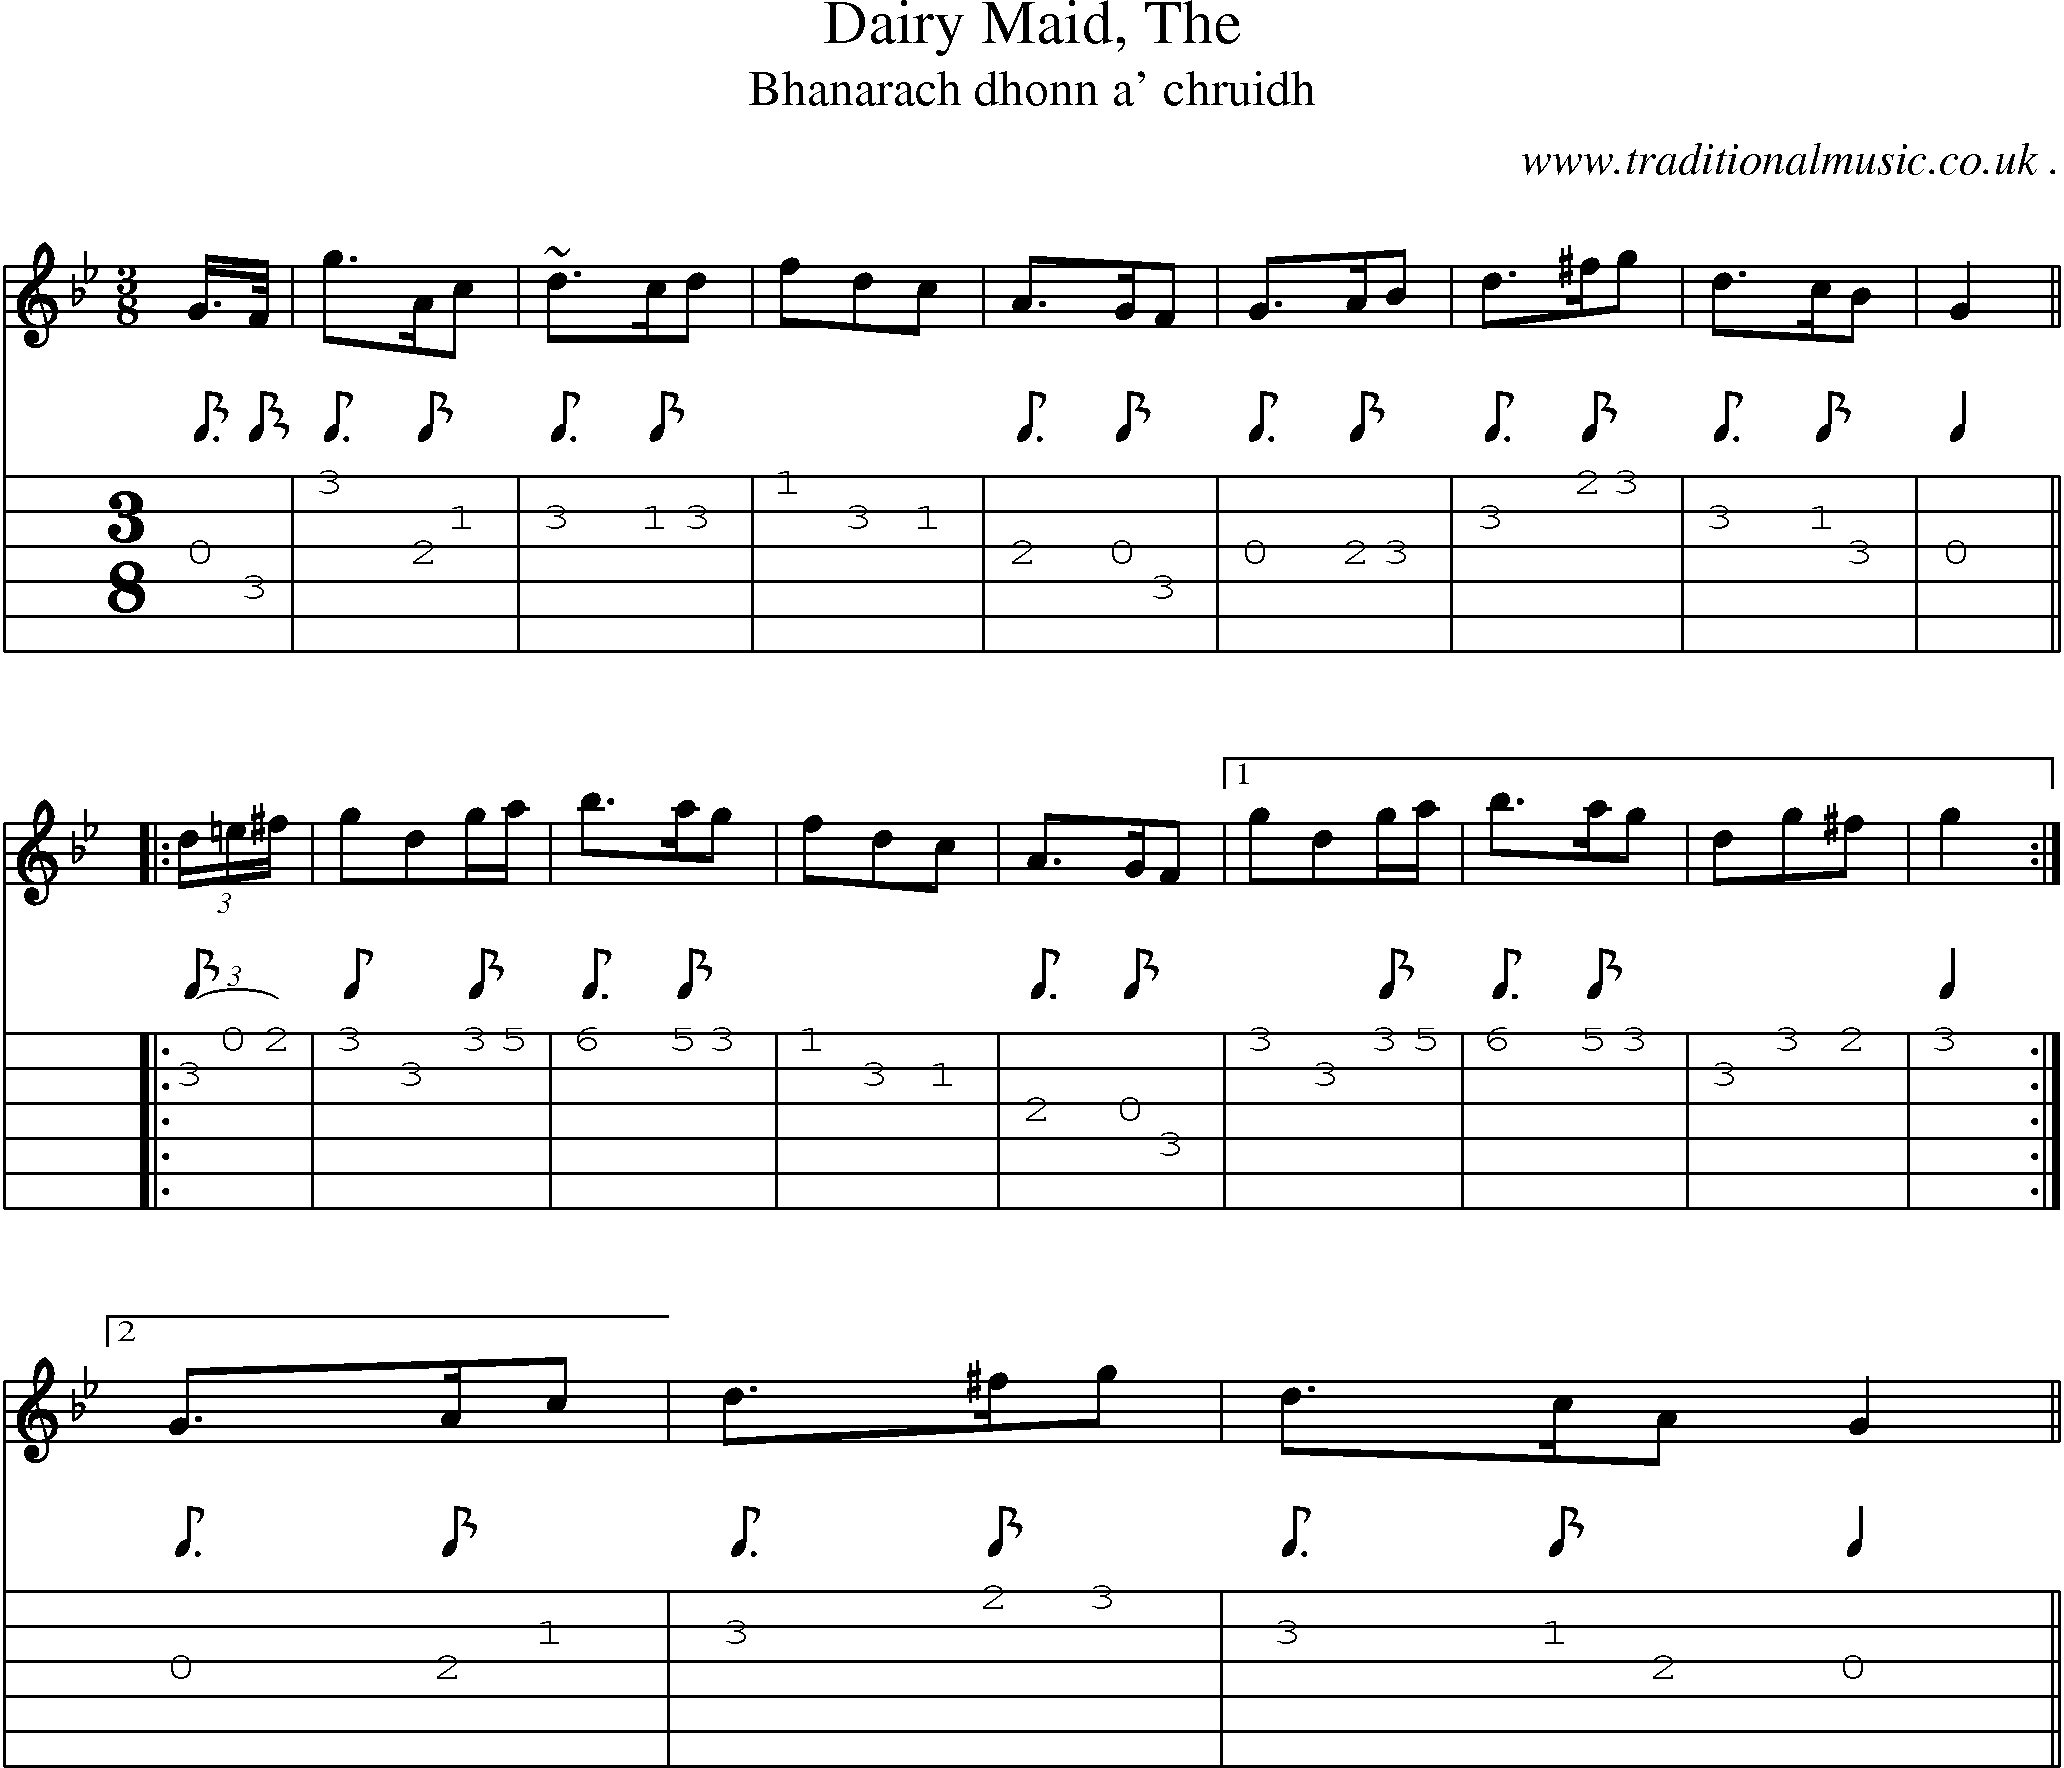 Sheet-music  score, Chords and Guitar Tabs for Dairy Maid The 